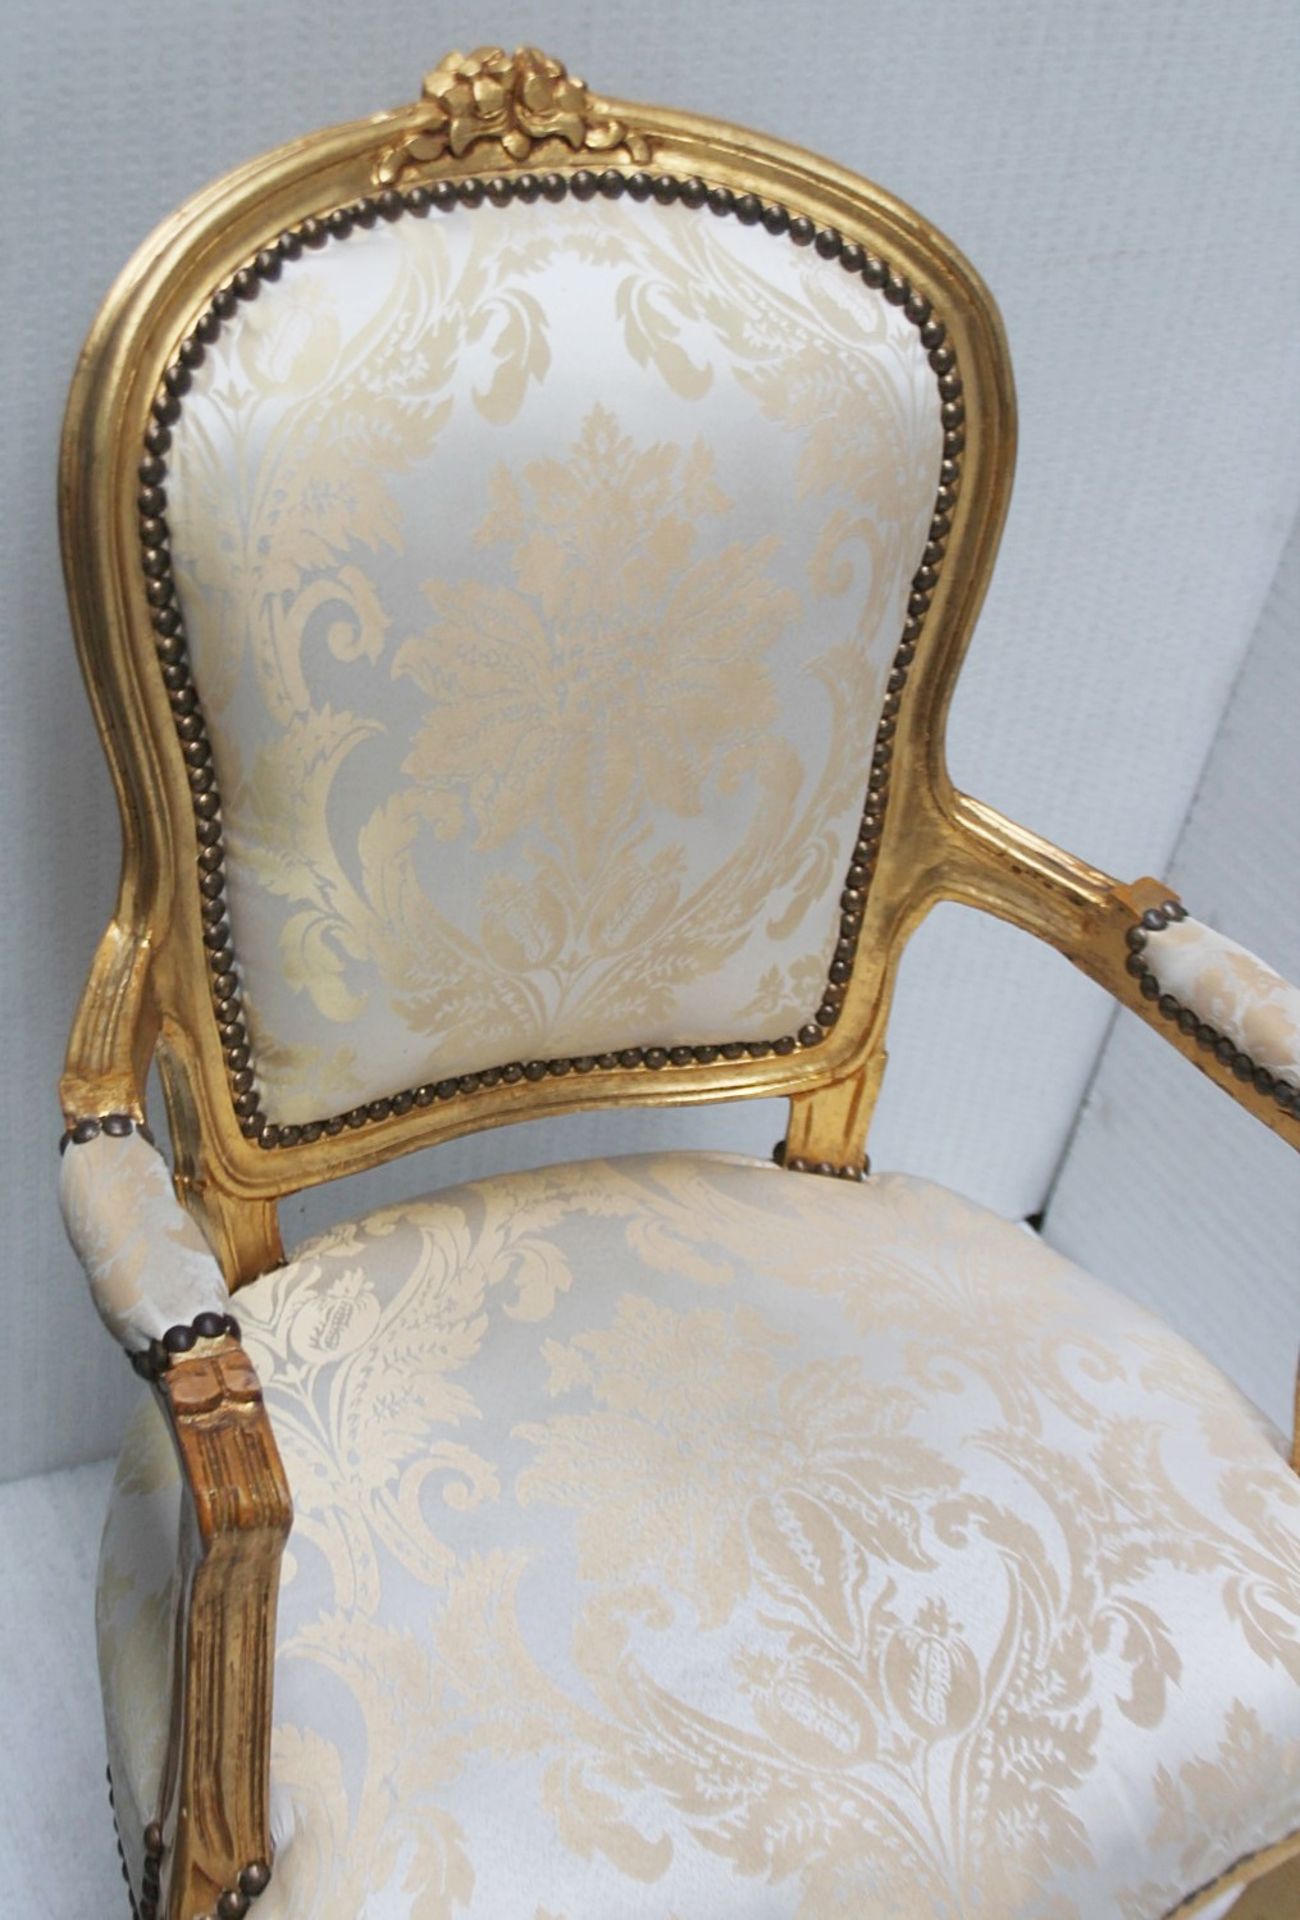 1 x Regency-Style Upholstered Chair In Gold & Silver With Ornate Carved Detailing - Recently Removed - Image 2 of 11